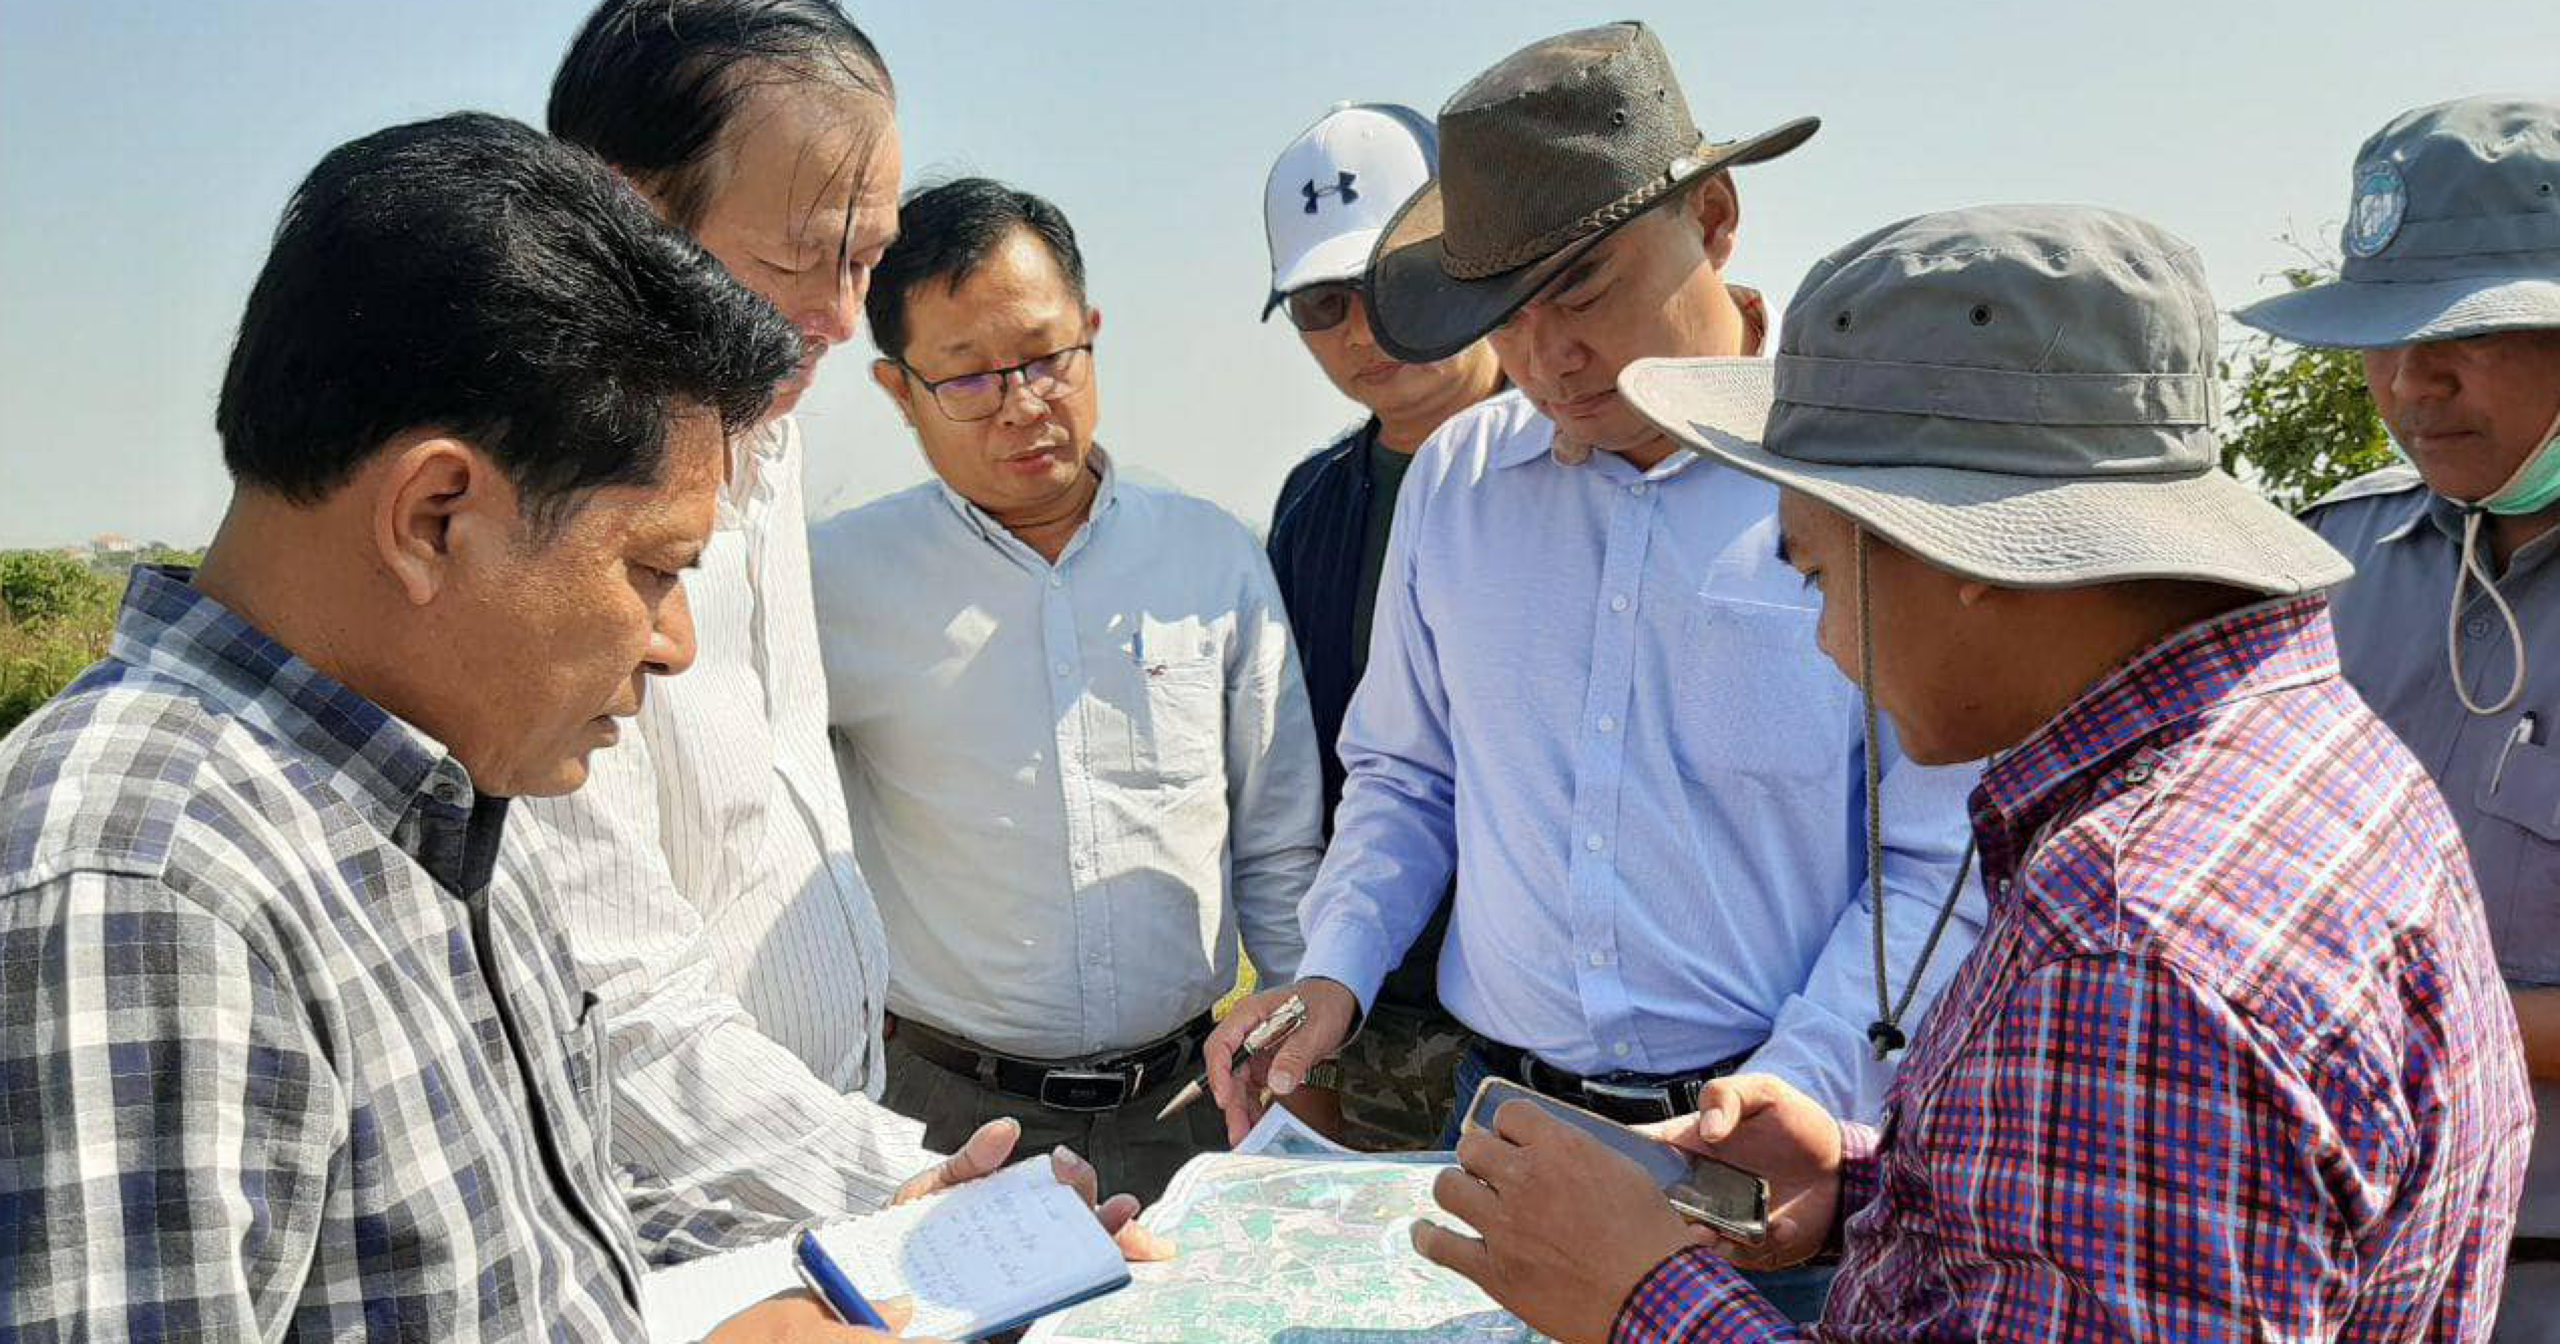 Huge New Affordable Housing Project Proposal Under Review in Kampong Chhnang